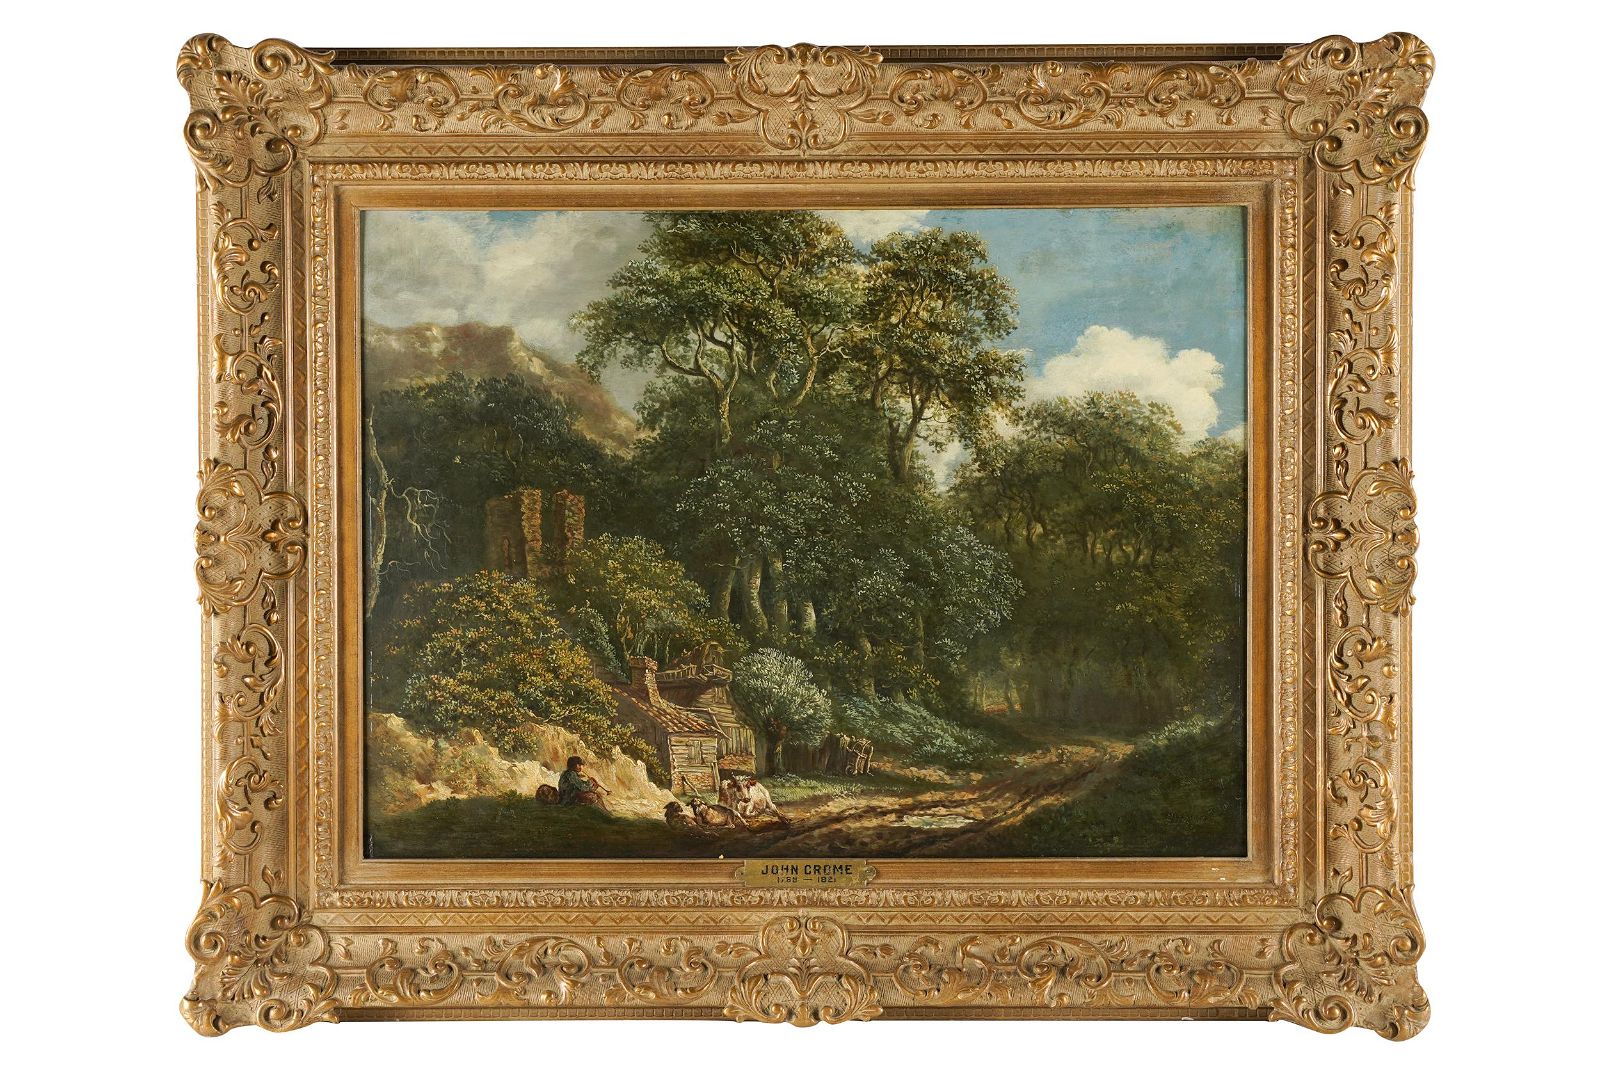 ATTRIBUTED TO JOHN CROME (1769